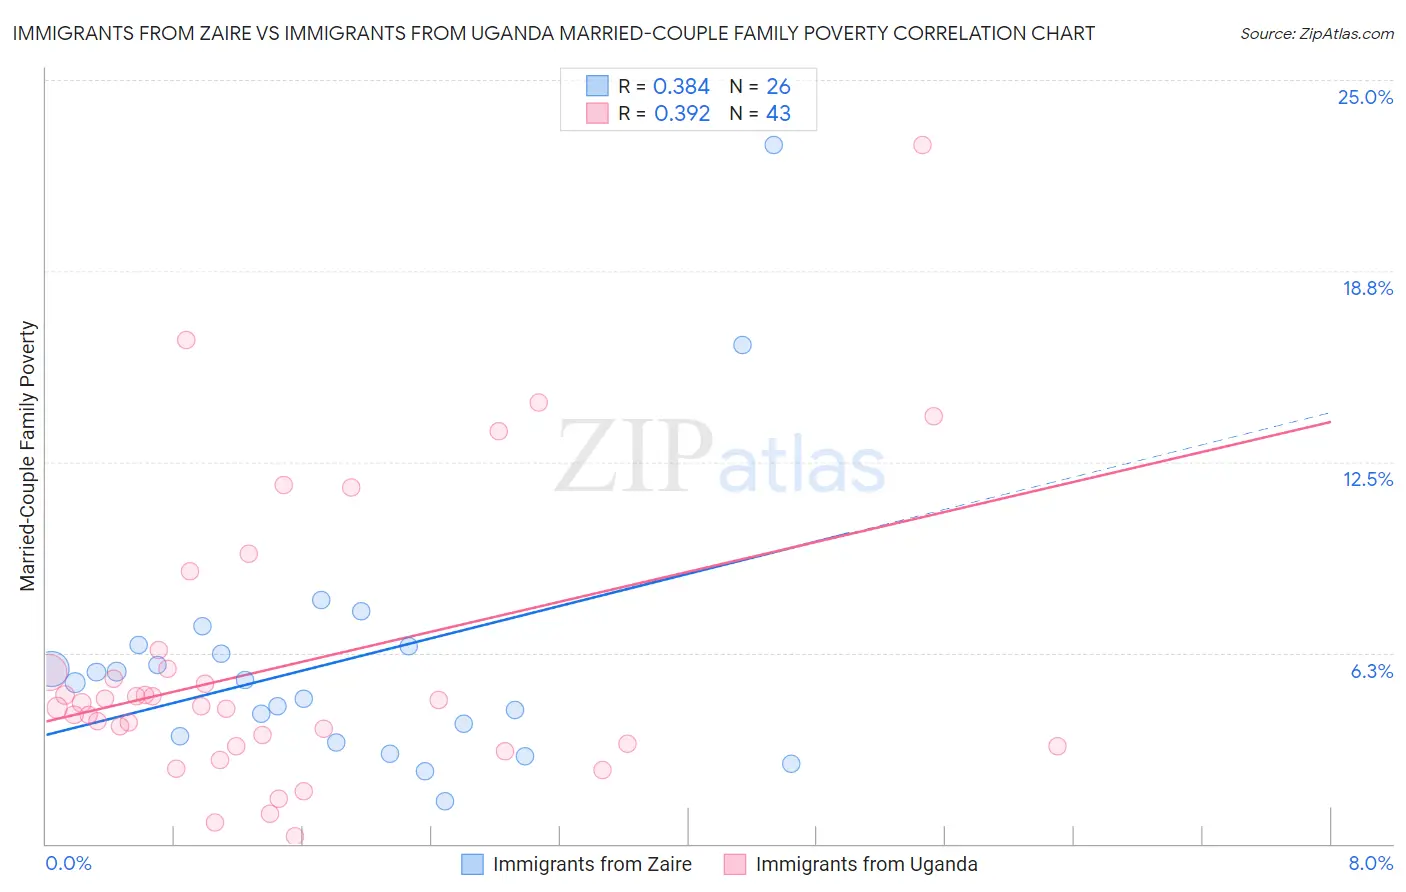 Immigrants from Zaire vs Immigrants from Uganda Married-Couple Family Poverty